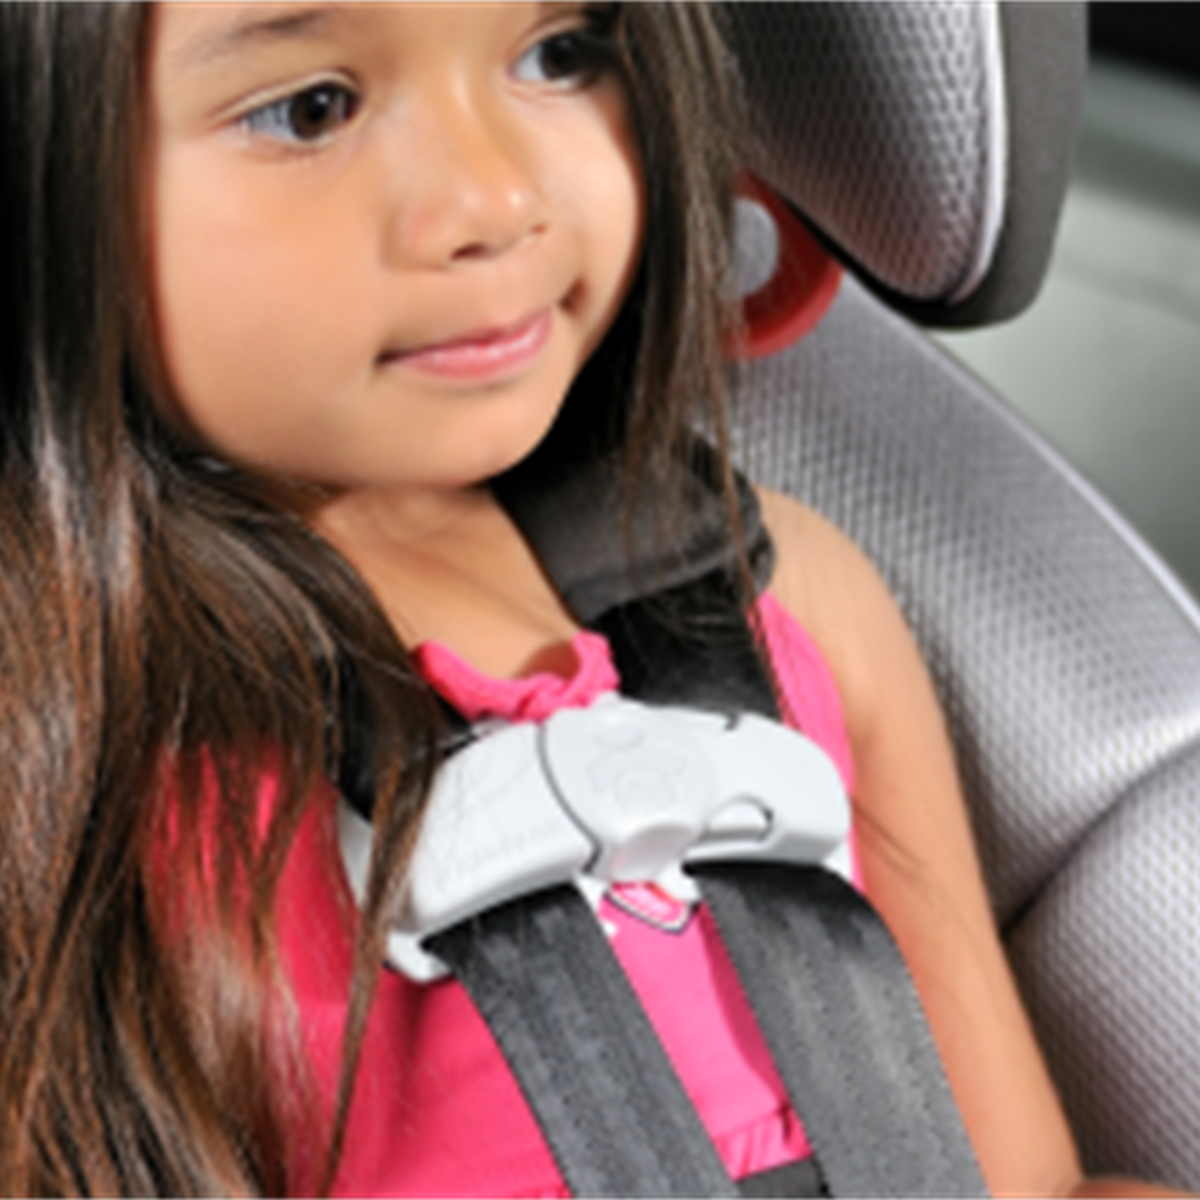 Car Seats Information For Families, How Tall Before No Car Seat